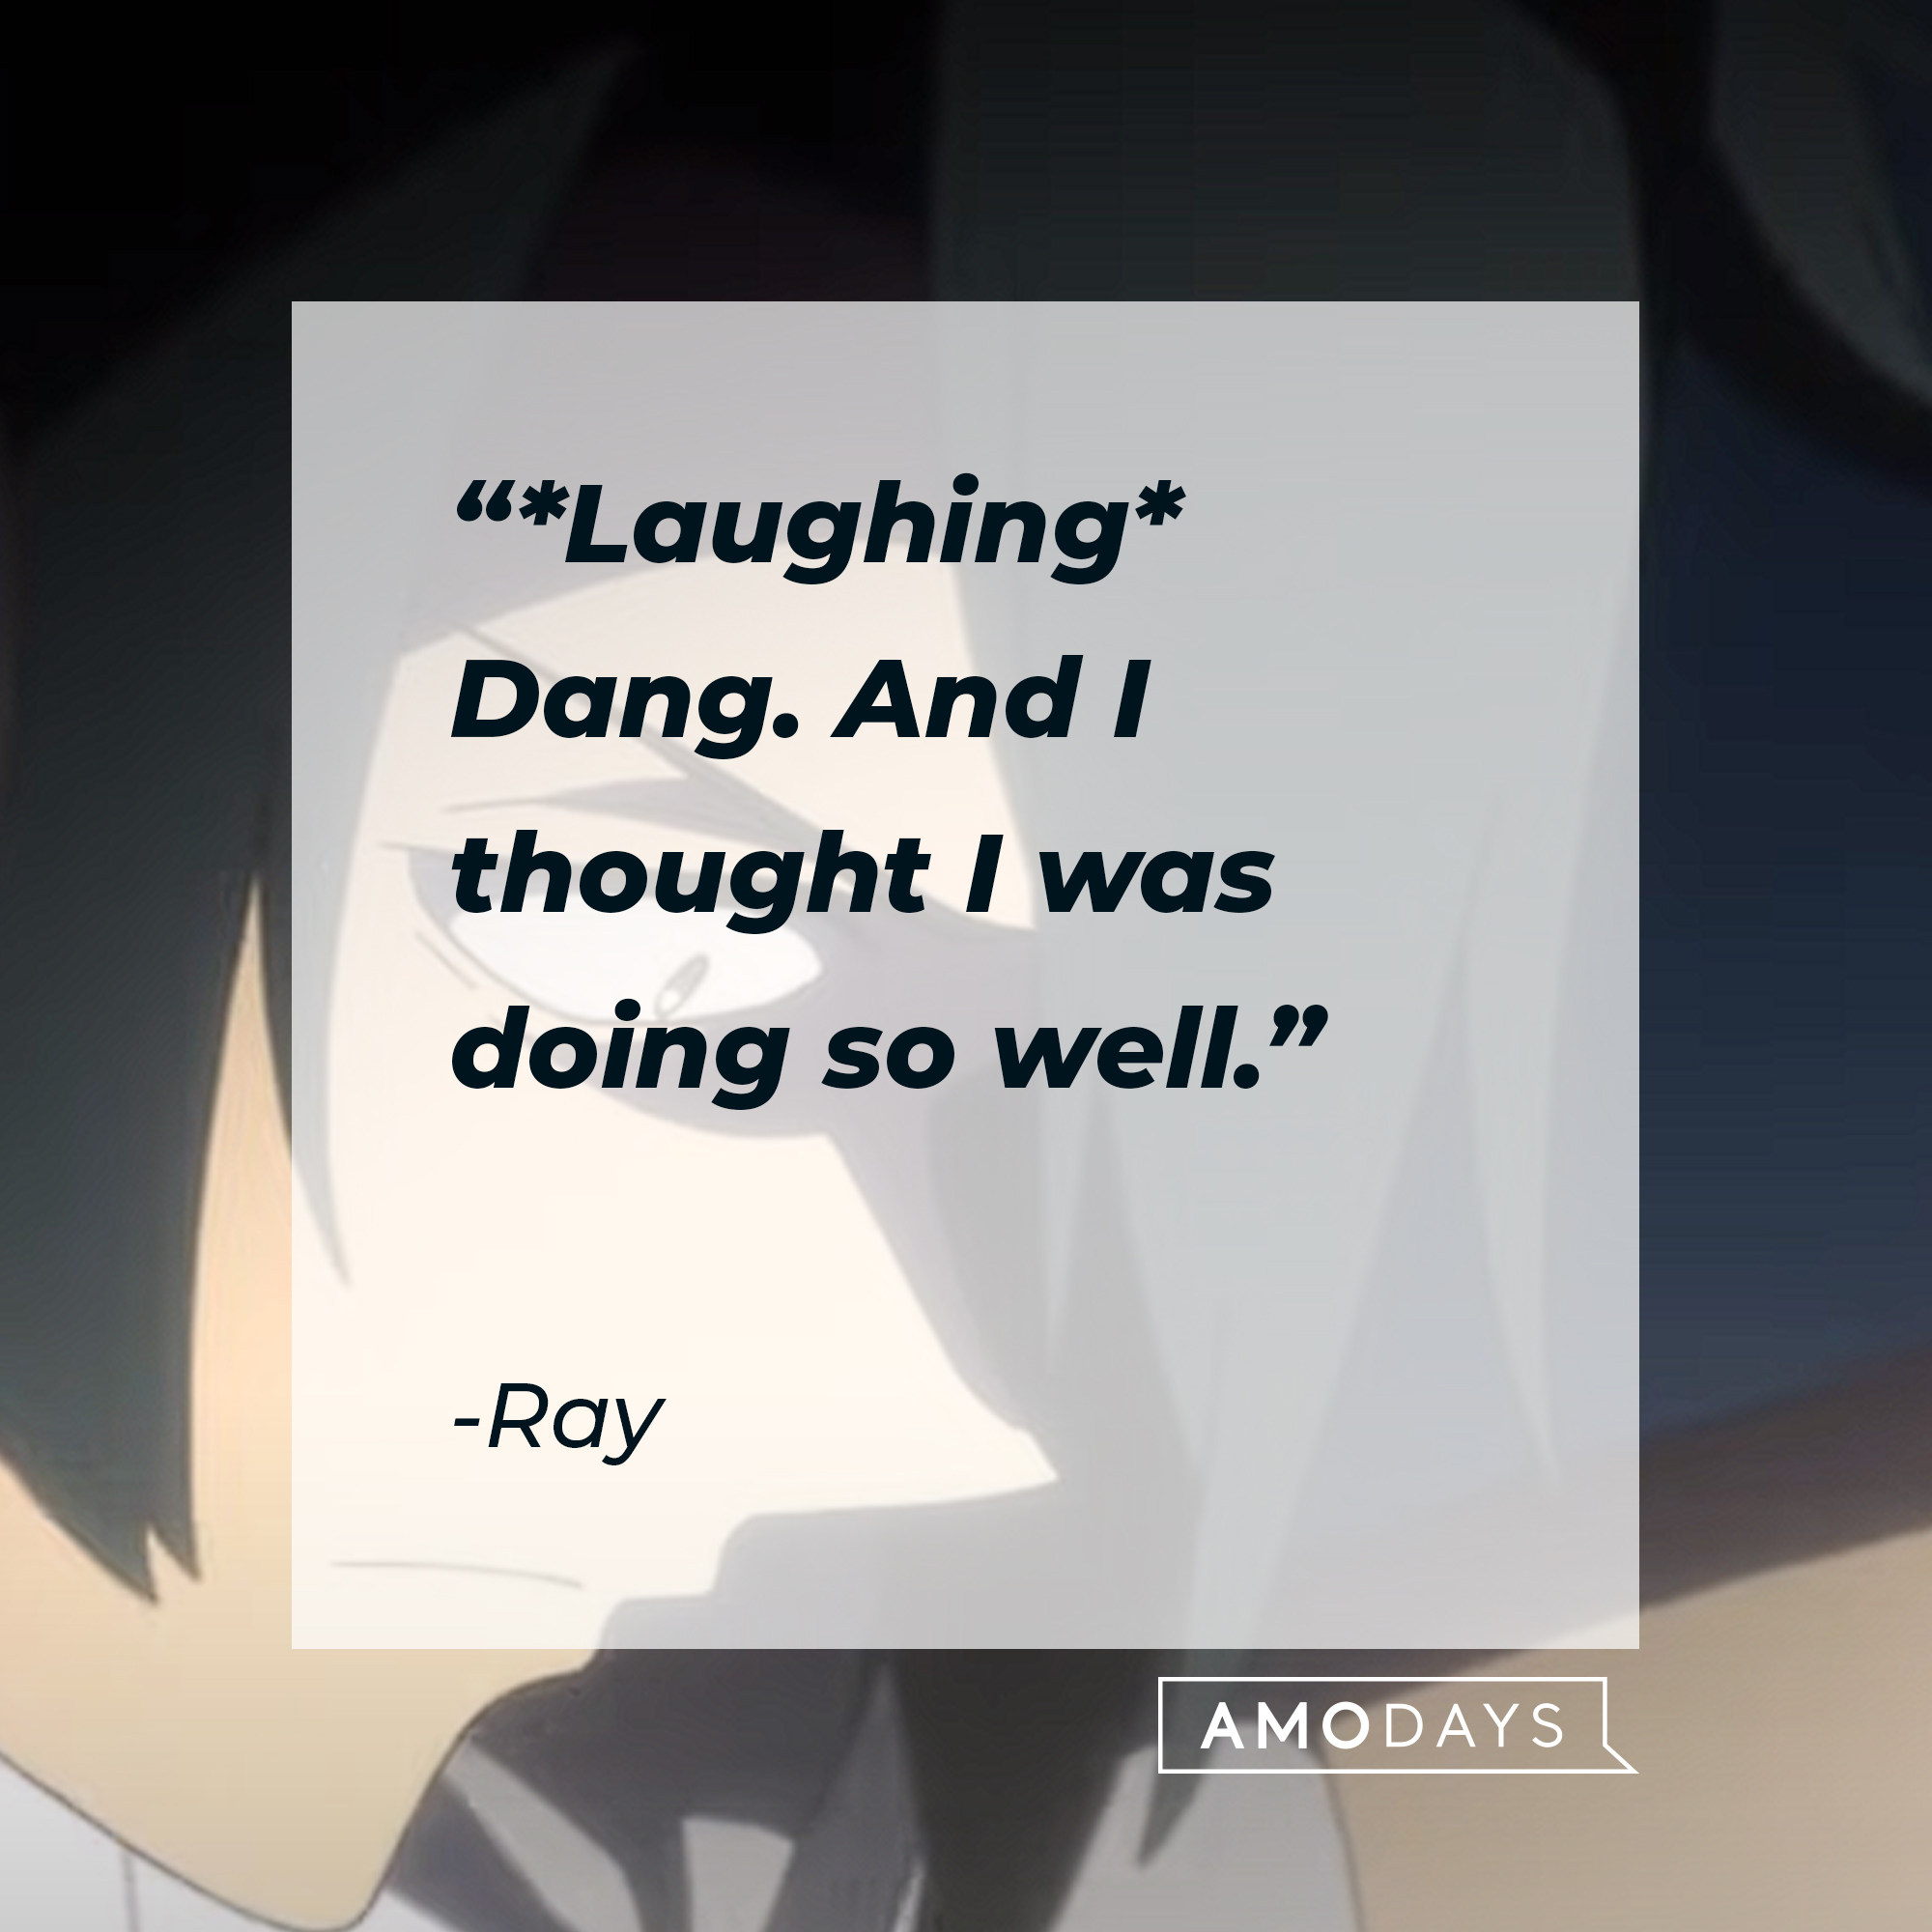 An image from the series “Promise Neverland” with Ray’s quote: “*Laughing* Dang. And I thought I was doing so well.” | Source: youtube.com/AniplexUSA